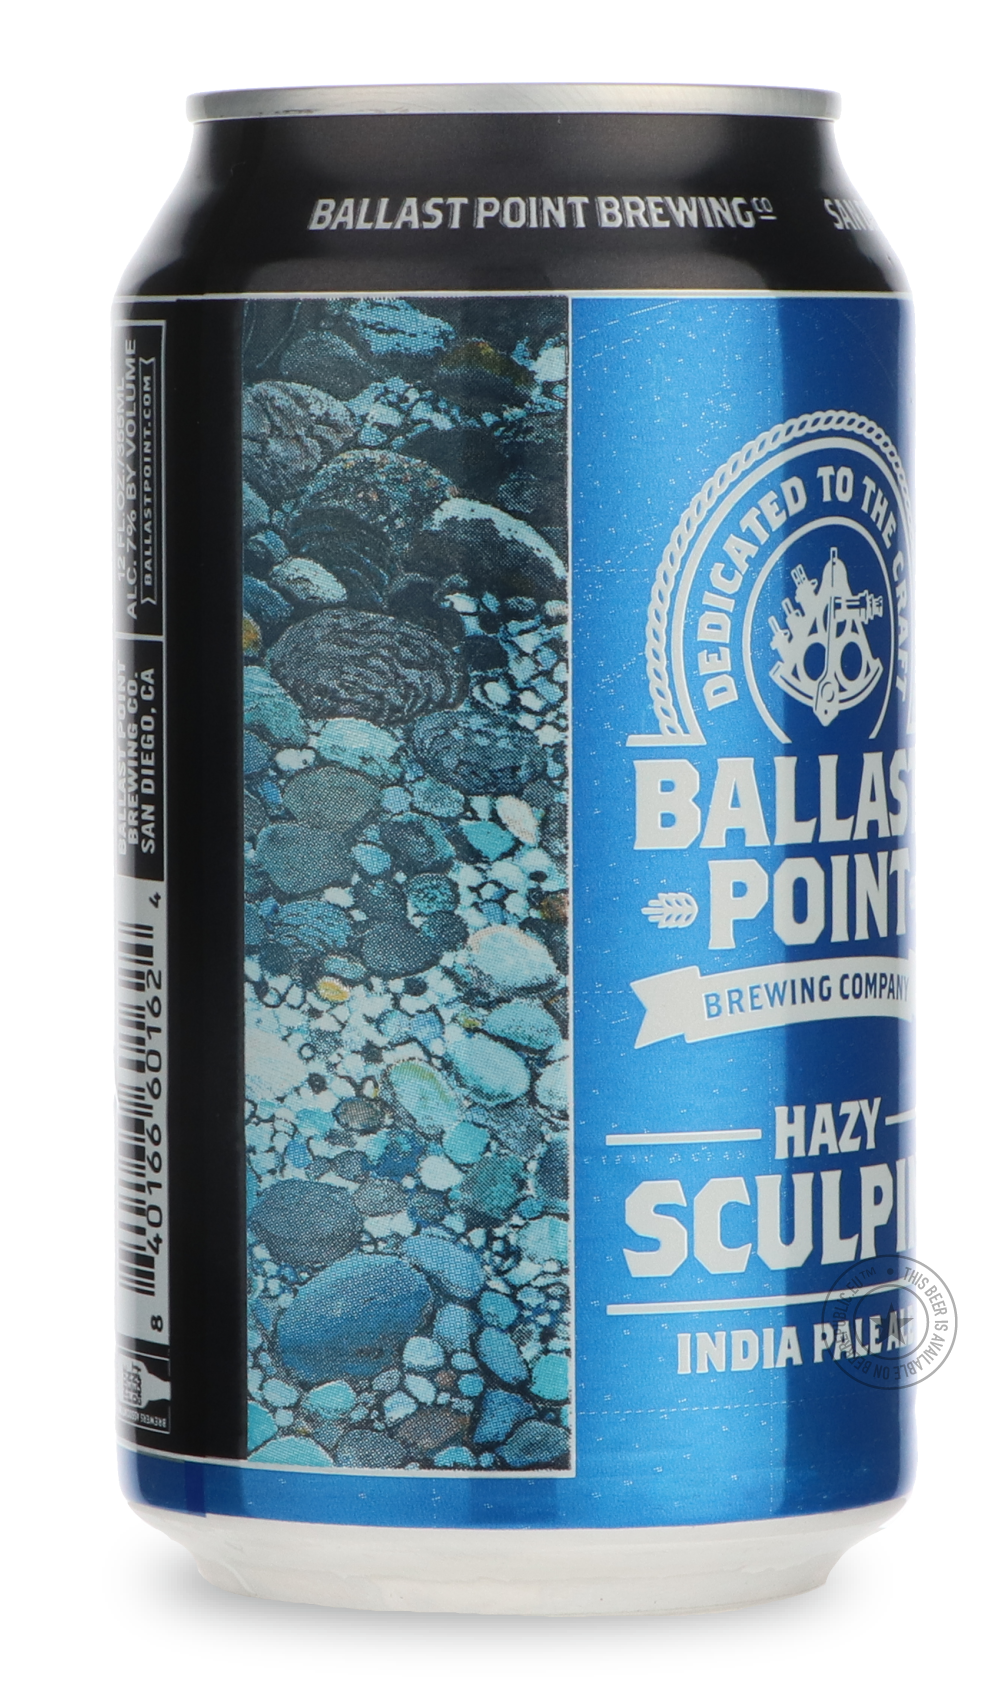 -Ballast Point- Hazy Sculpin-IPA- Only @ Beer Republic - The best online beer store for American & Canadian craft beer - Buy beer online from the USA and Canada - Bier online kopen - Amerikaans bier kopen - Craft beer store - Craft beer kopen - Amerikanisch bier kaufen - Bier online kaufen - Acheter biere online - IPA - Stout - Porter - New England IPA - Hazy IPA - Imperial Stout - Barrel Aged - Barrel Aged Imperial Stout - Brown - Dark beer - Blond - Blonde - Pilsner - Lager - Wheat - Weizen - Amber - Barl